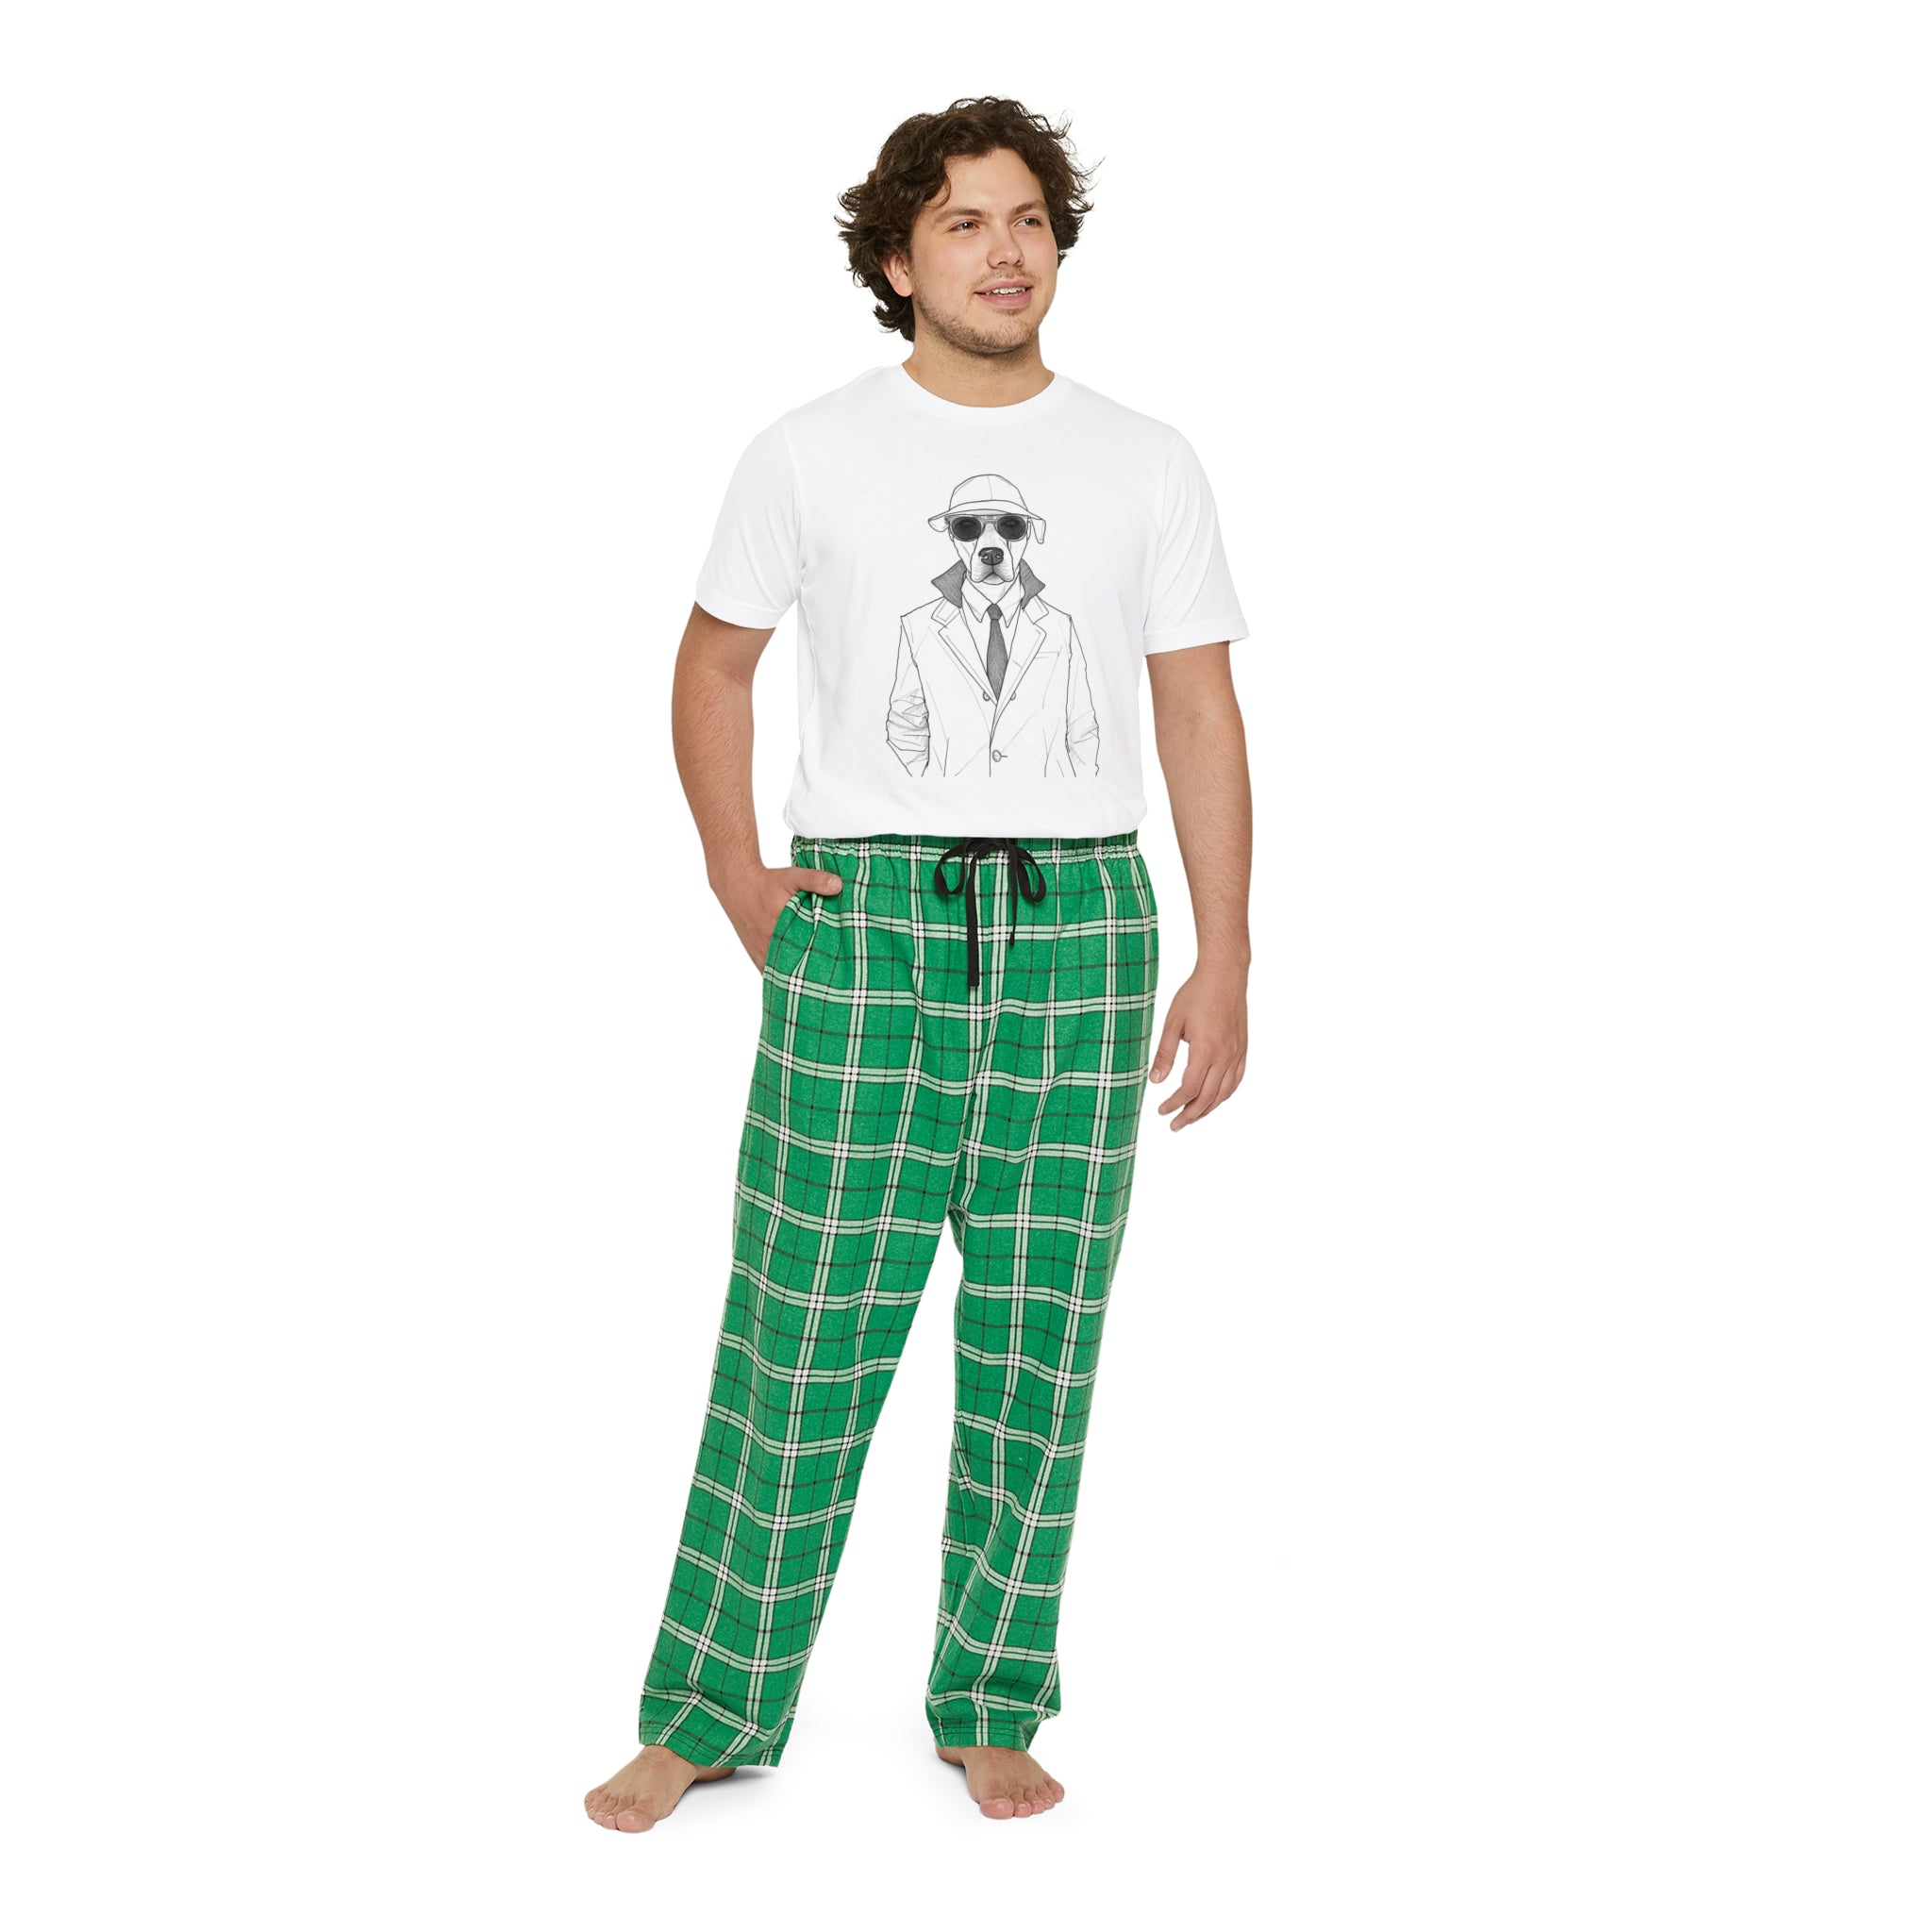 🐕 Artistic Slumber with Agent Dog: Dive into comfort with the "Agent Dog Single Line Pencil Sketch Men's Short Sleeve Pajama Set." This unique sleepwear features an elegant single line pencil sketch of a canine agent, perfect for men who appreciate art and a touch of whimsy in their nightwear.